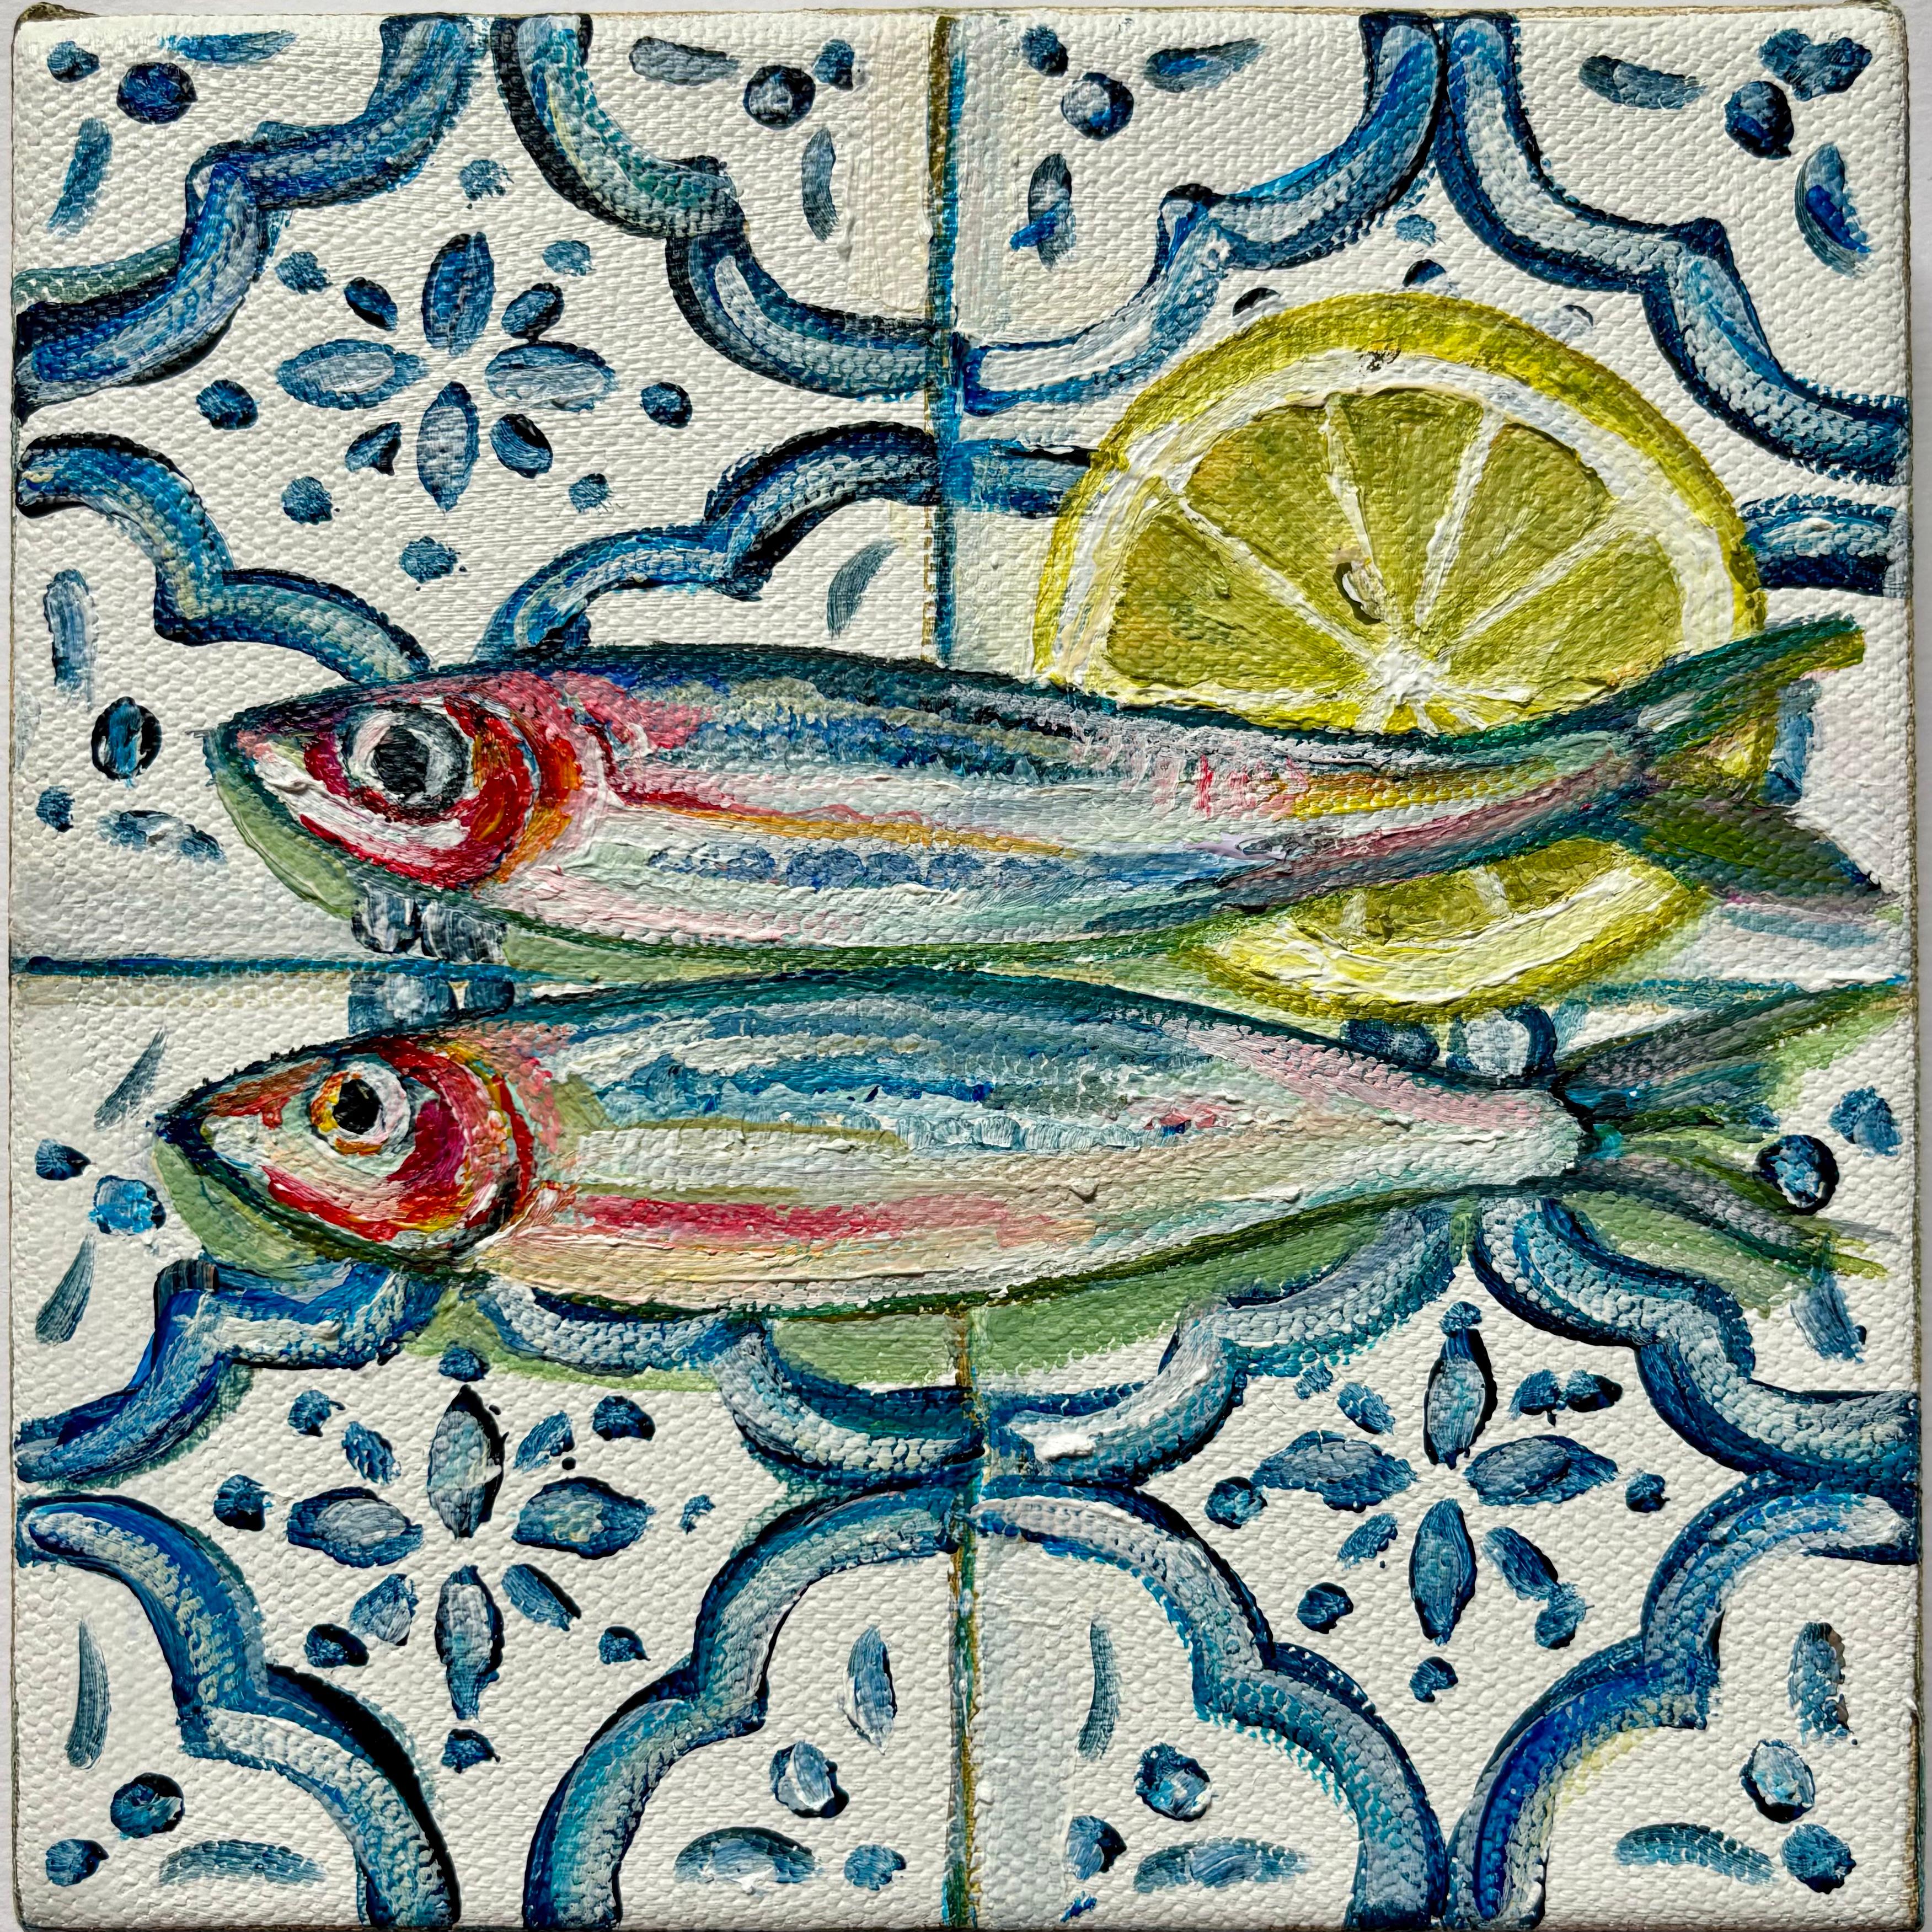 Sardines with Lemon, Original painting, Food art, Seafood, Mediterranean - Contemporary Painting by Pippa Smith